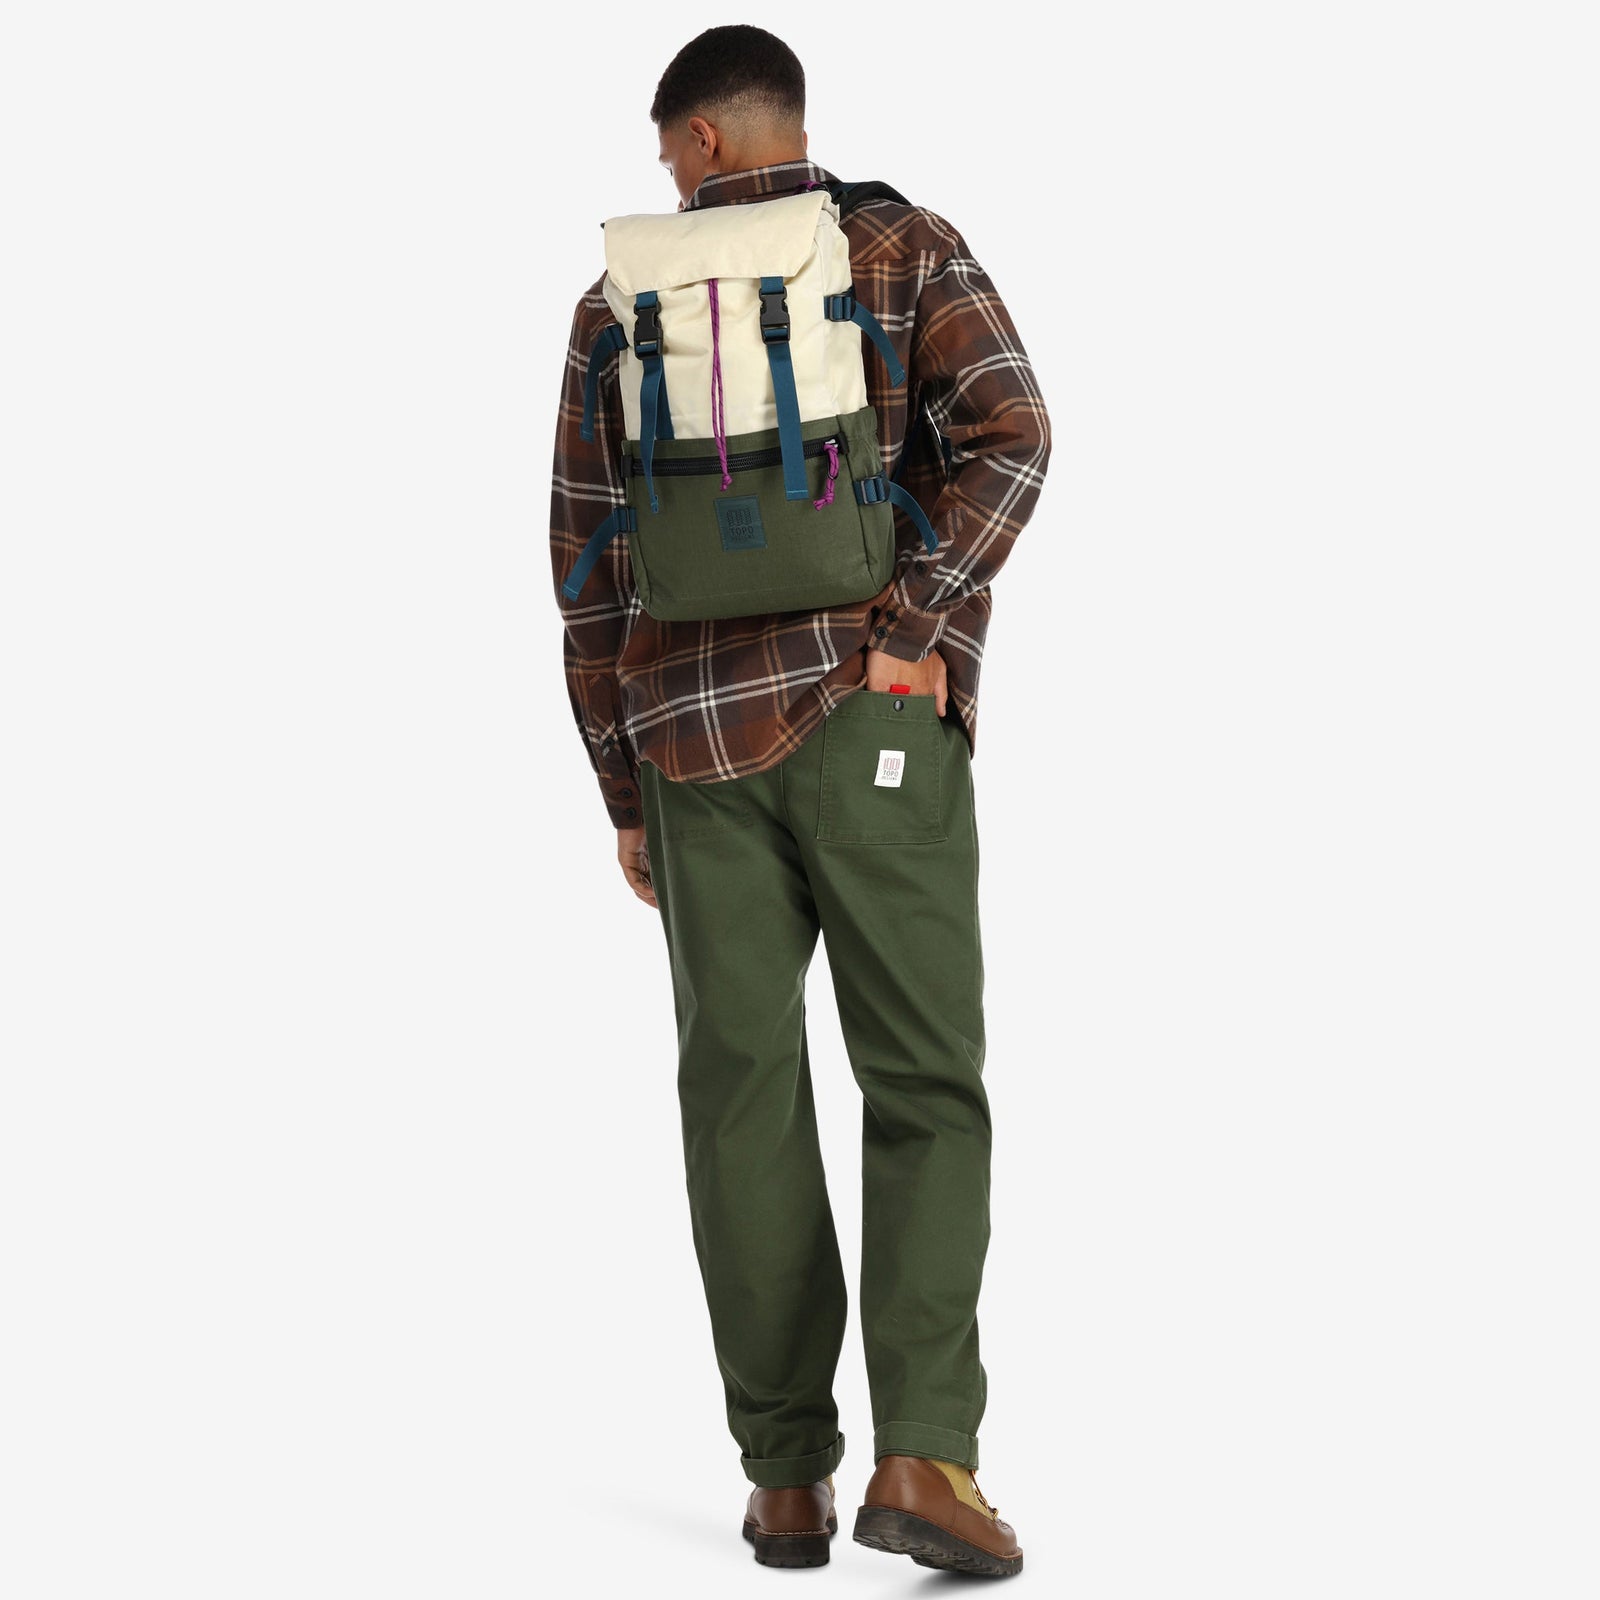 Model wearing Topo Designs Rover Pack Classic laptop backpack in recycled "Bone White / Olive" green.